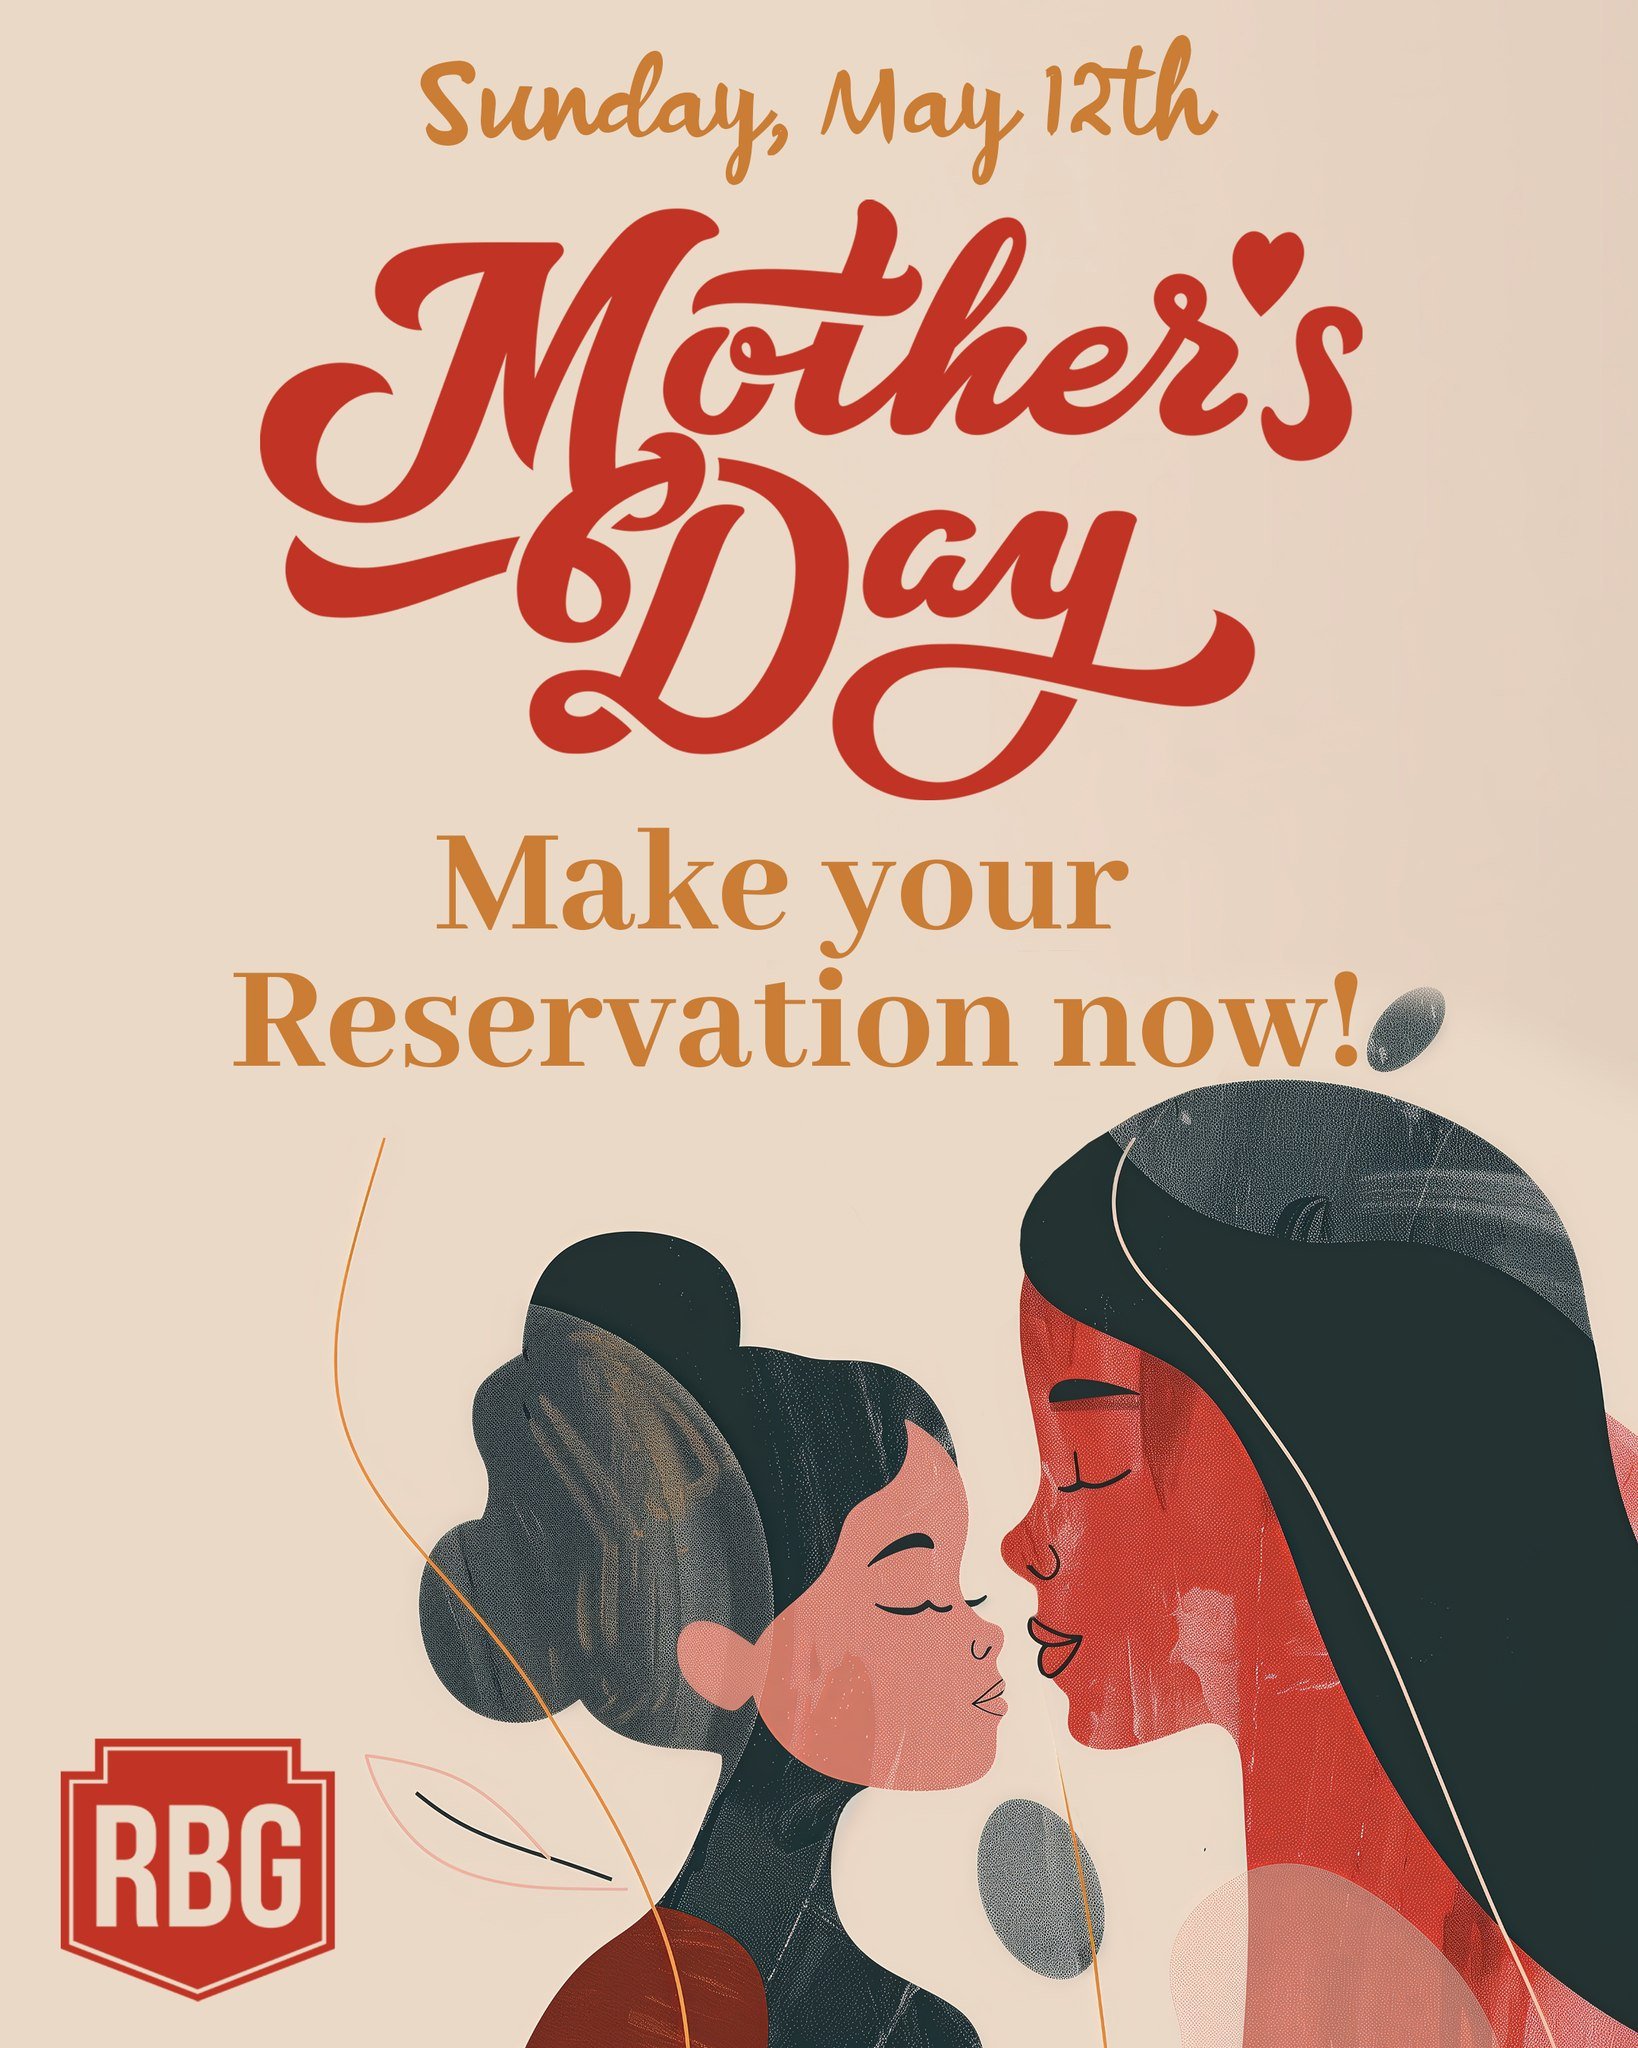 GET YOUR RESERVATION'S IN NOW! WE WILL BE RUNNING SOME DELICIOUS SPECIALS!! 😊😍 LET'S CELEBRATE THOSE AMAZING MOTHER'S OF OURS! 😊